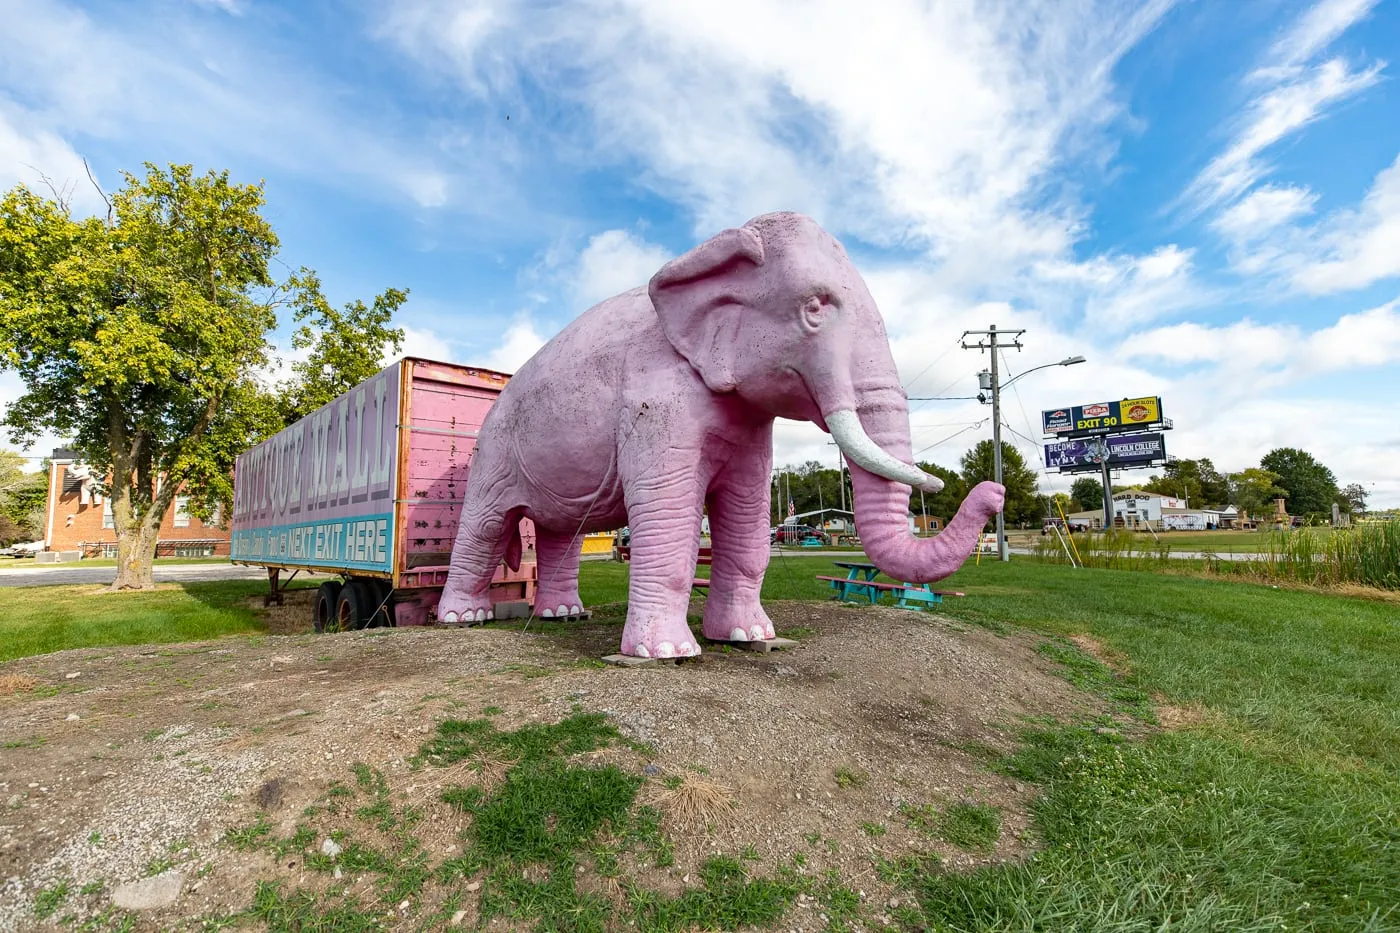 Giant pink elephant at the Pink Elephant Antique Mall in Livingston, Illinois - Route 66 Roadside Attraction